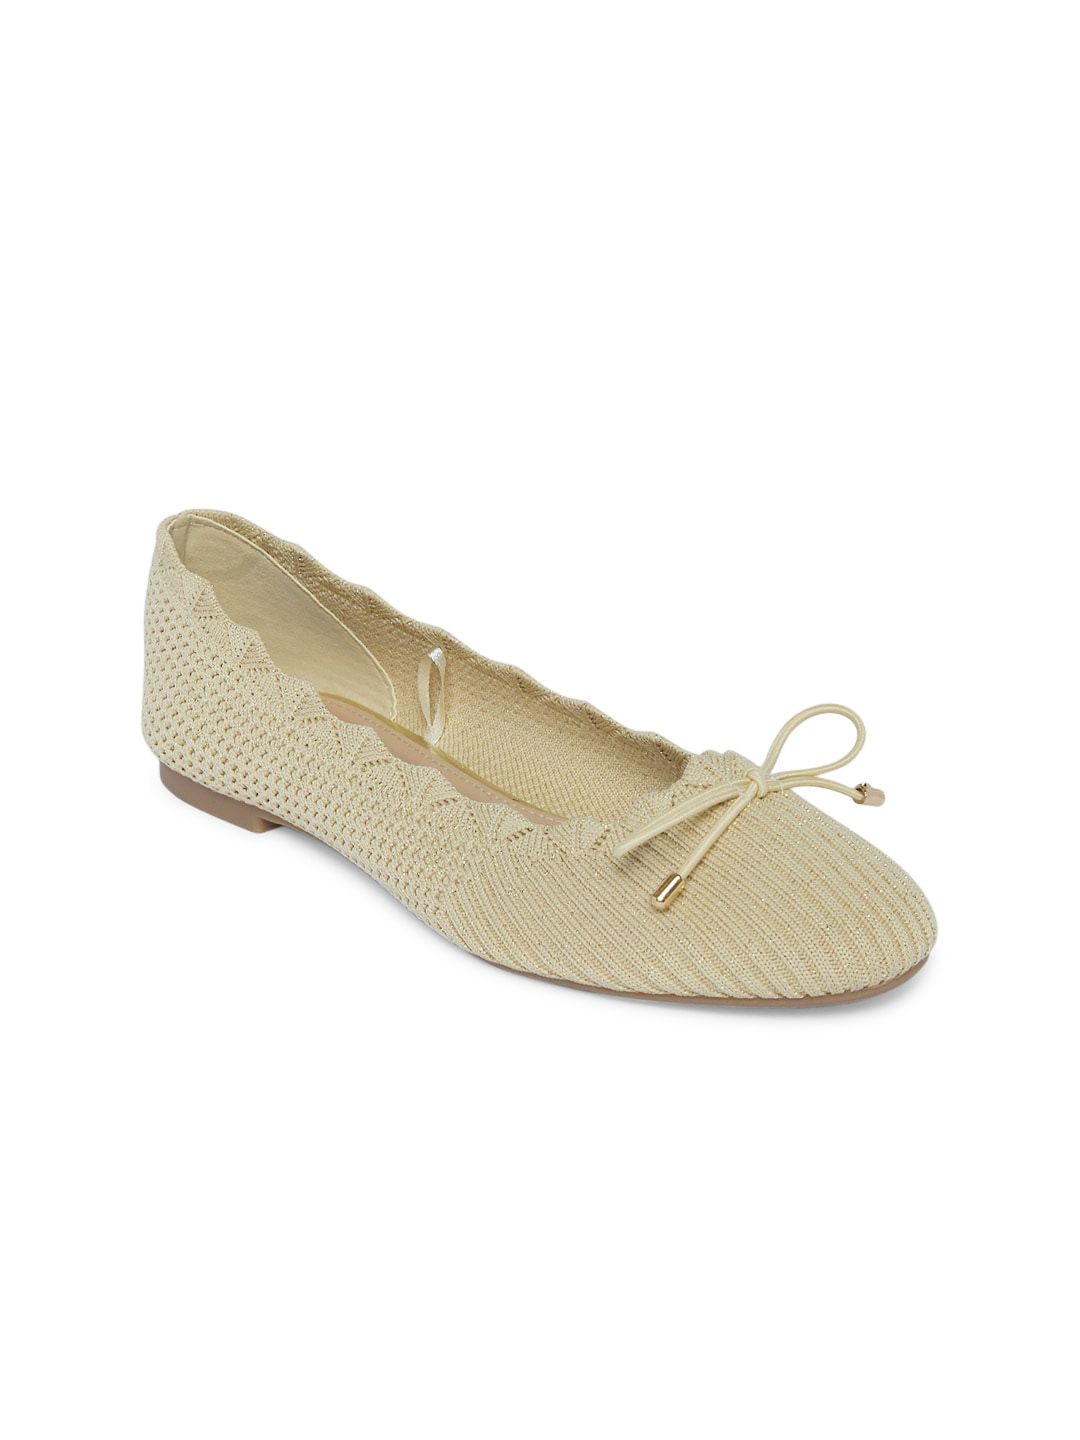 Forever Glam by Pantaloons Women Beige Ballerinas with Bows Flats Price in India